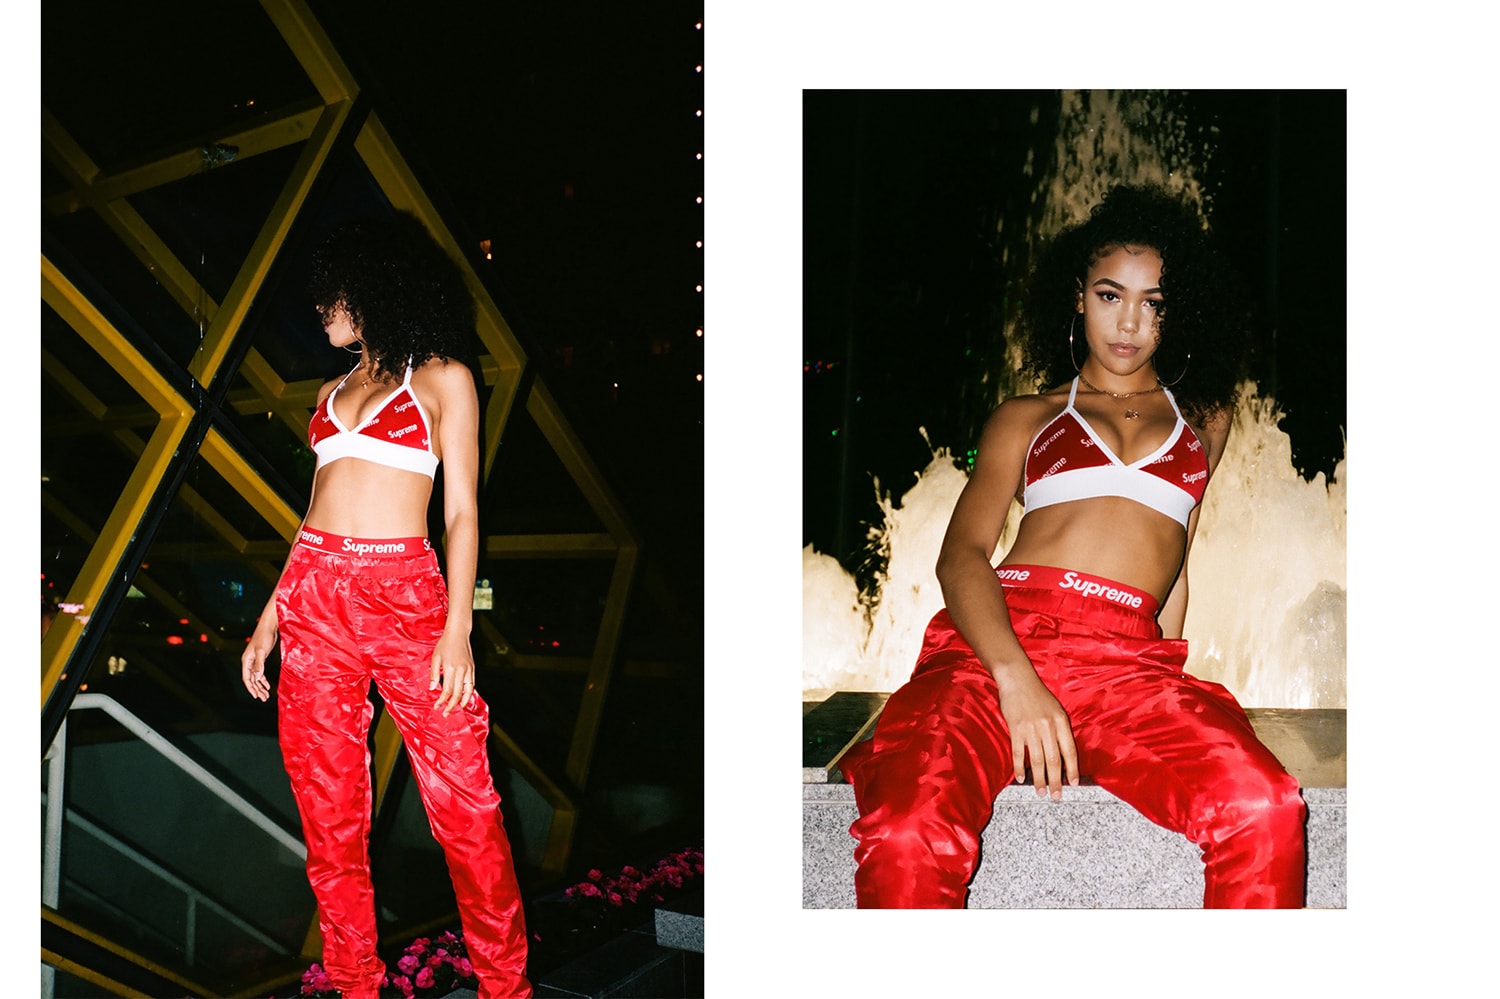 Frankie Collective's Reworked Streetwear is Everything — CNK Daily  (ChicksNKicks)